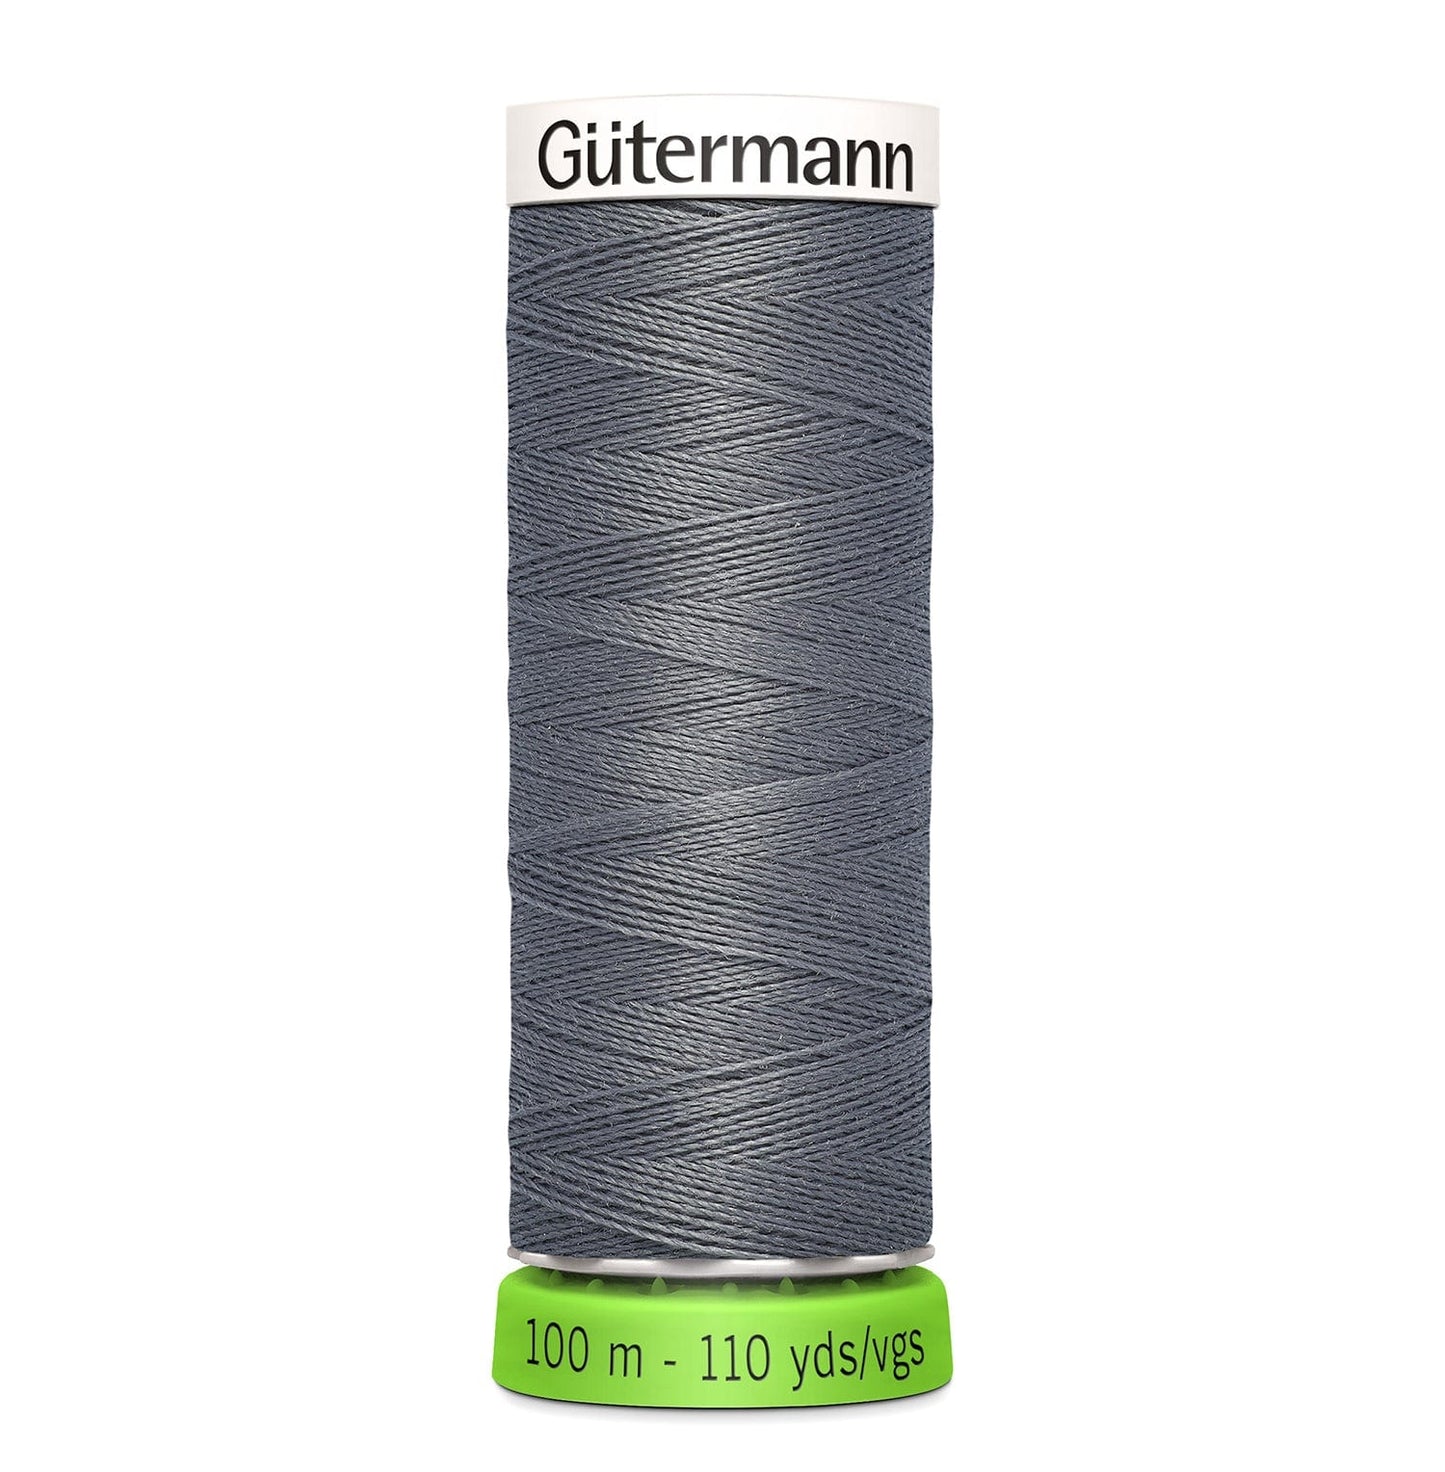 100 m Reel Gütermann Recycled Sew-All Thread in Grey, no. 497